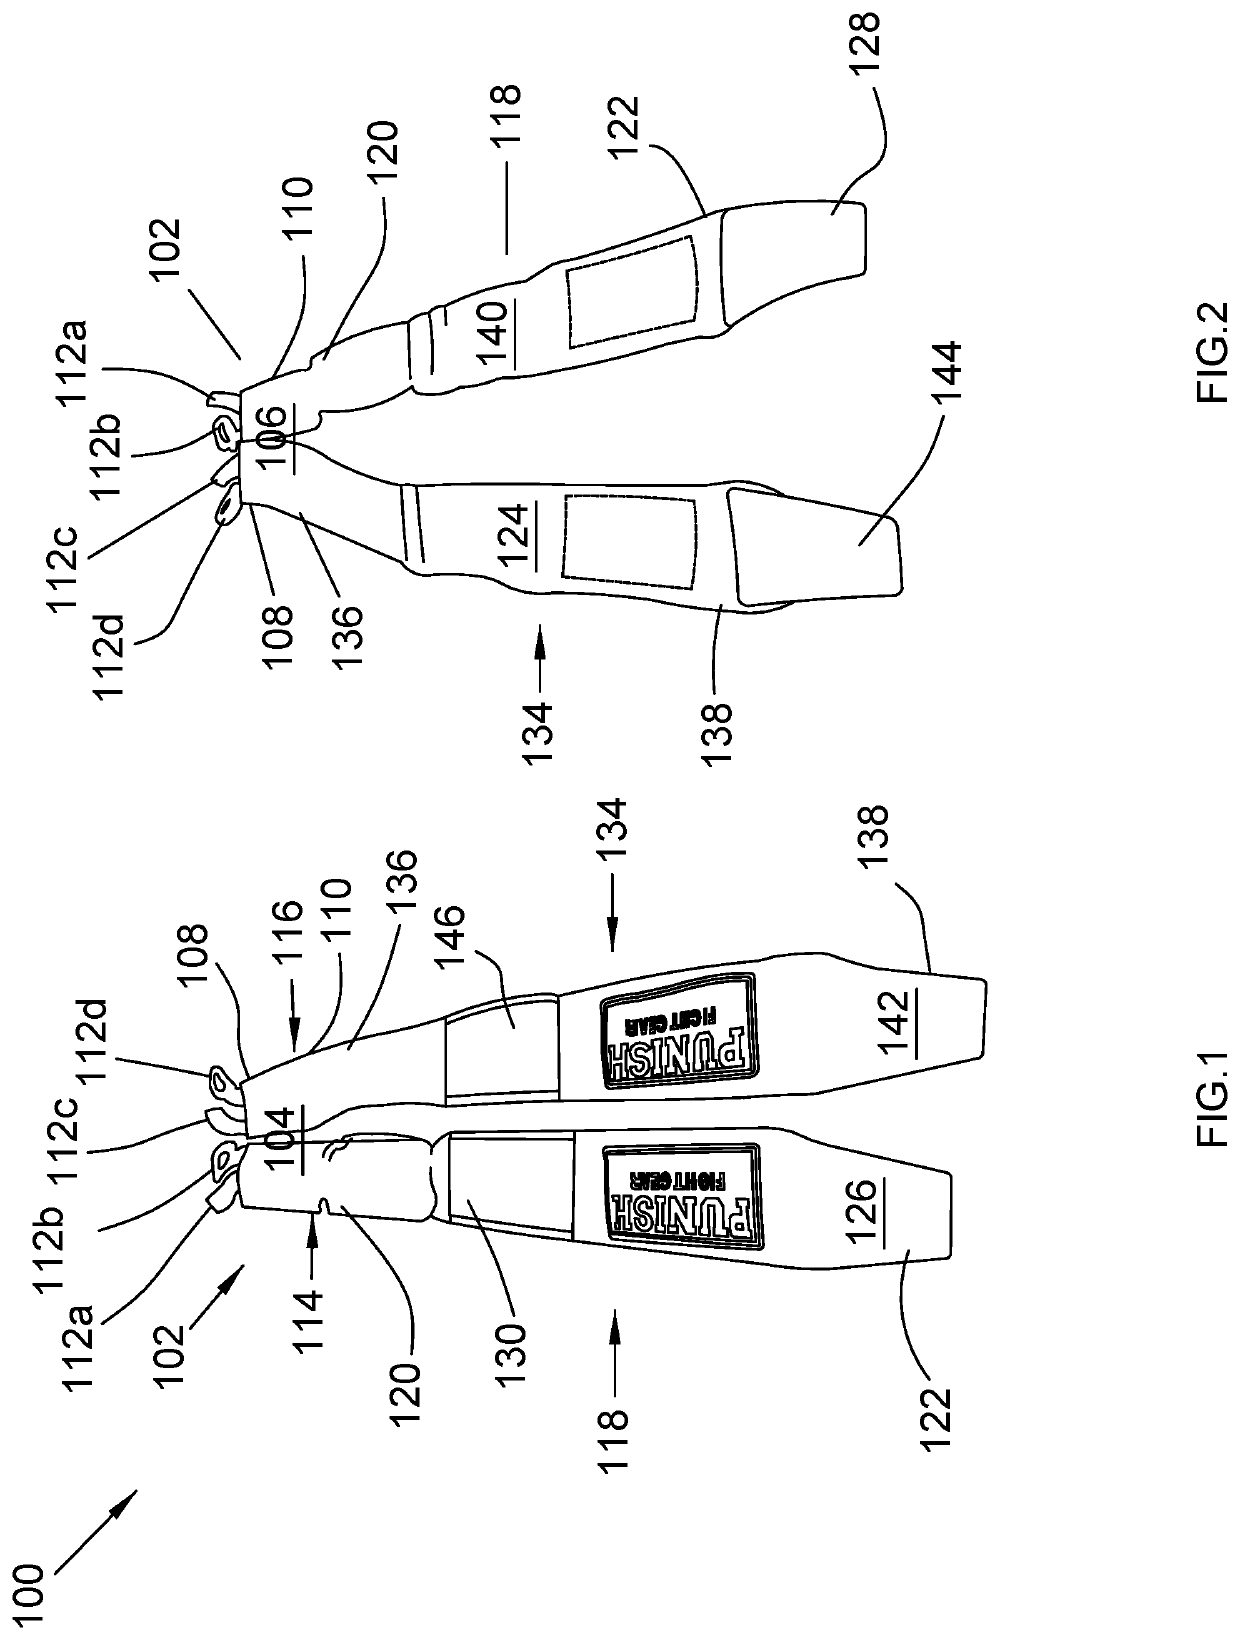 Double-strap hand wrapping apparatus and method of use